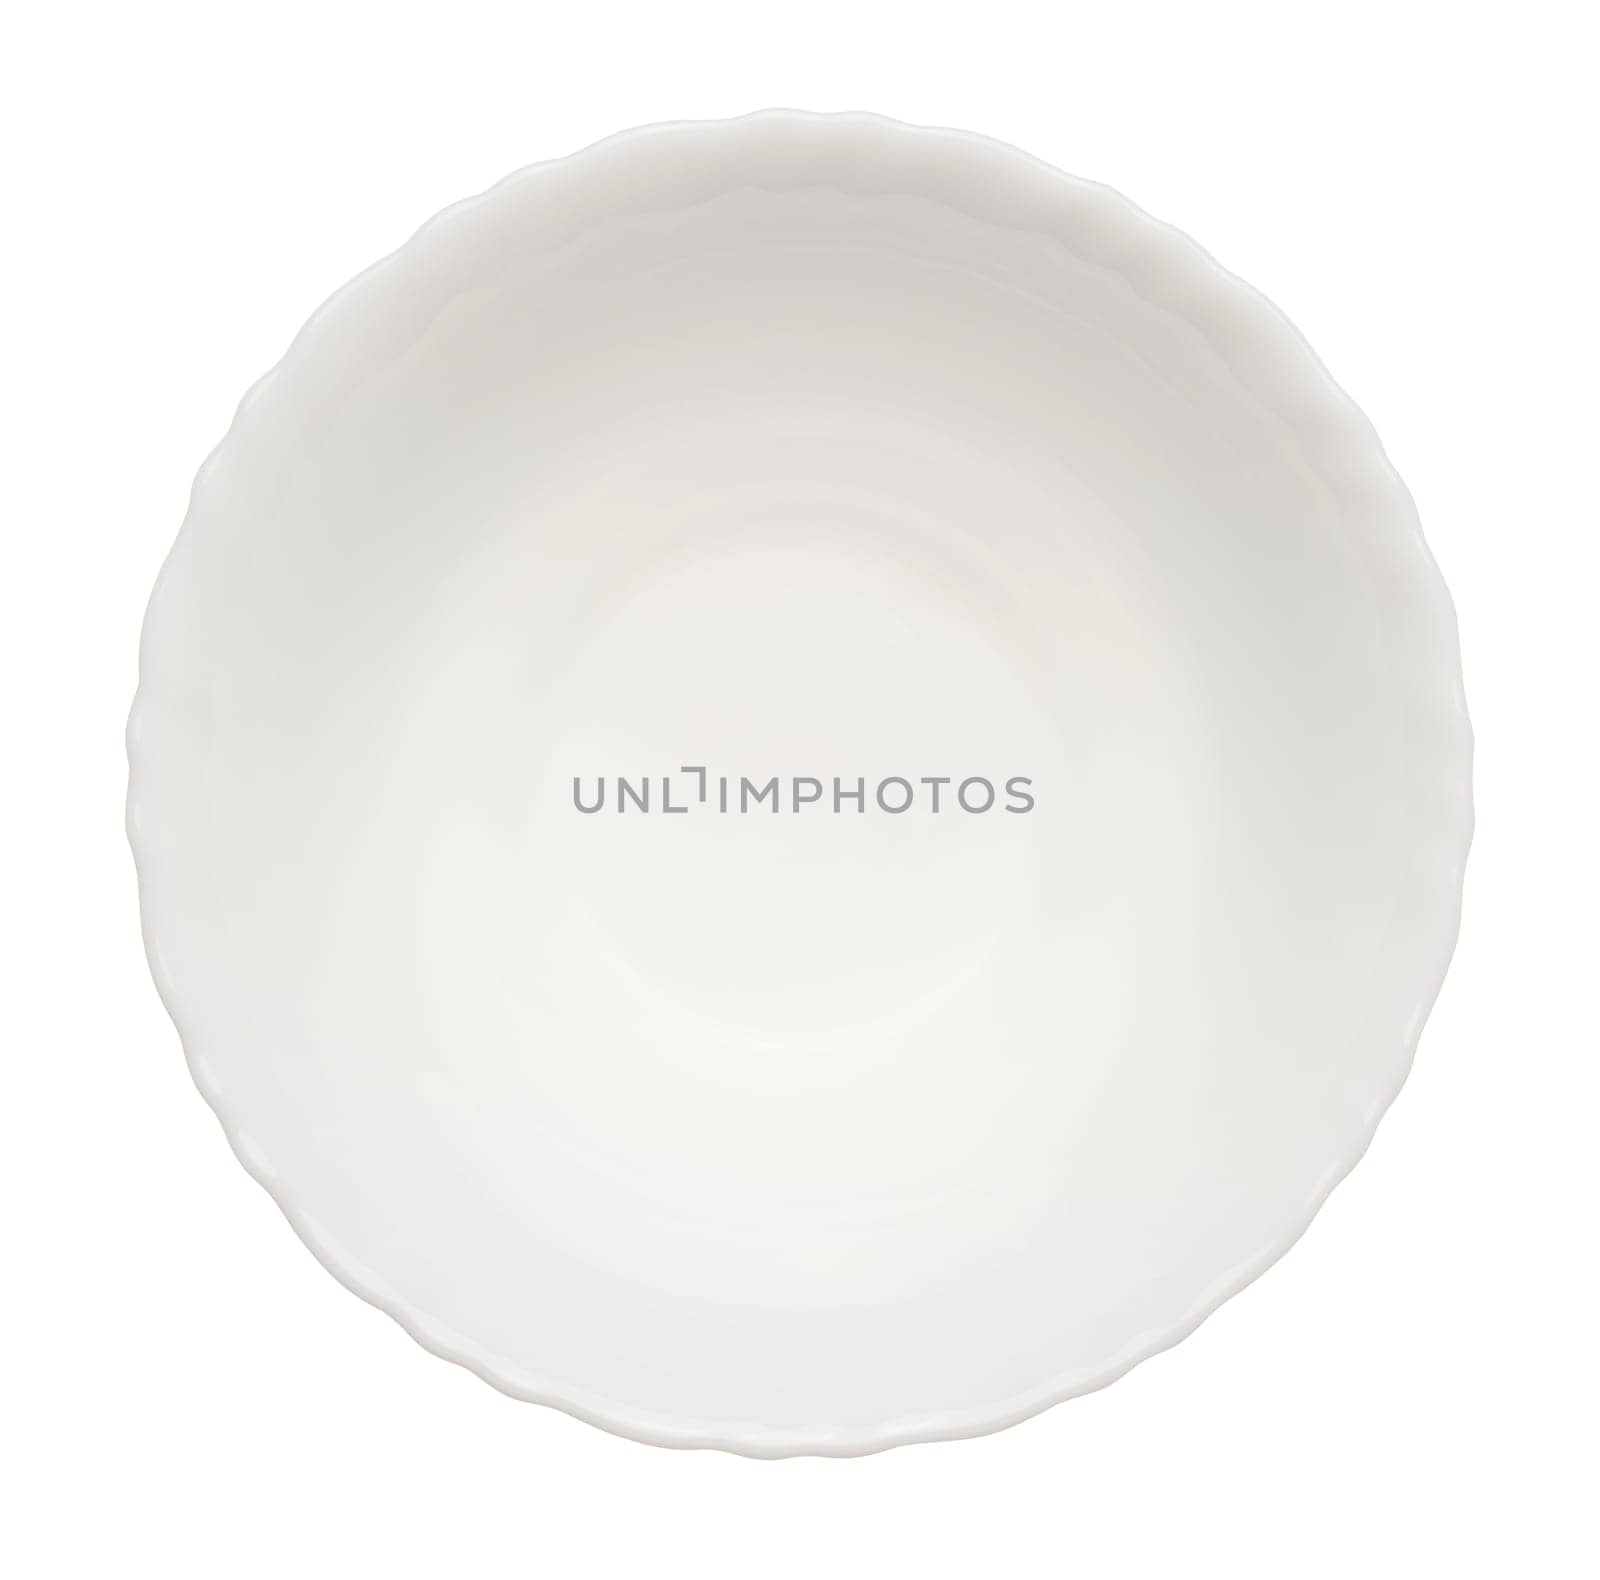 Empty white ceramic soup plate, top view